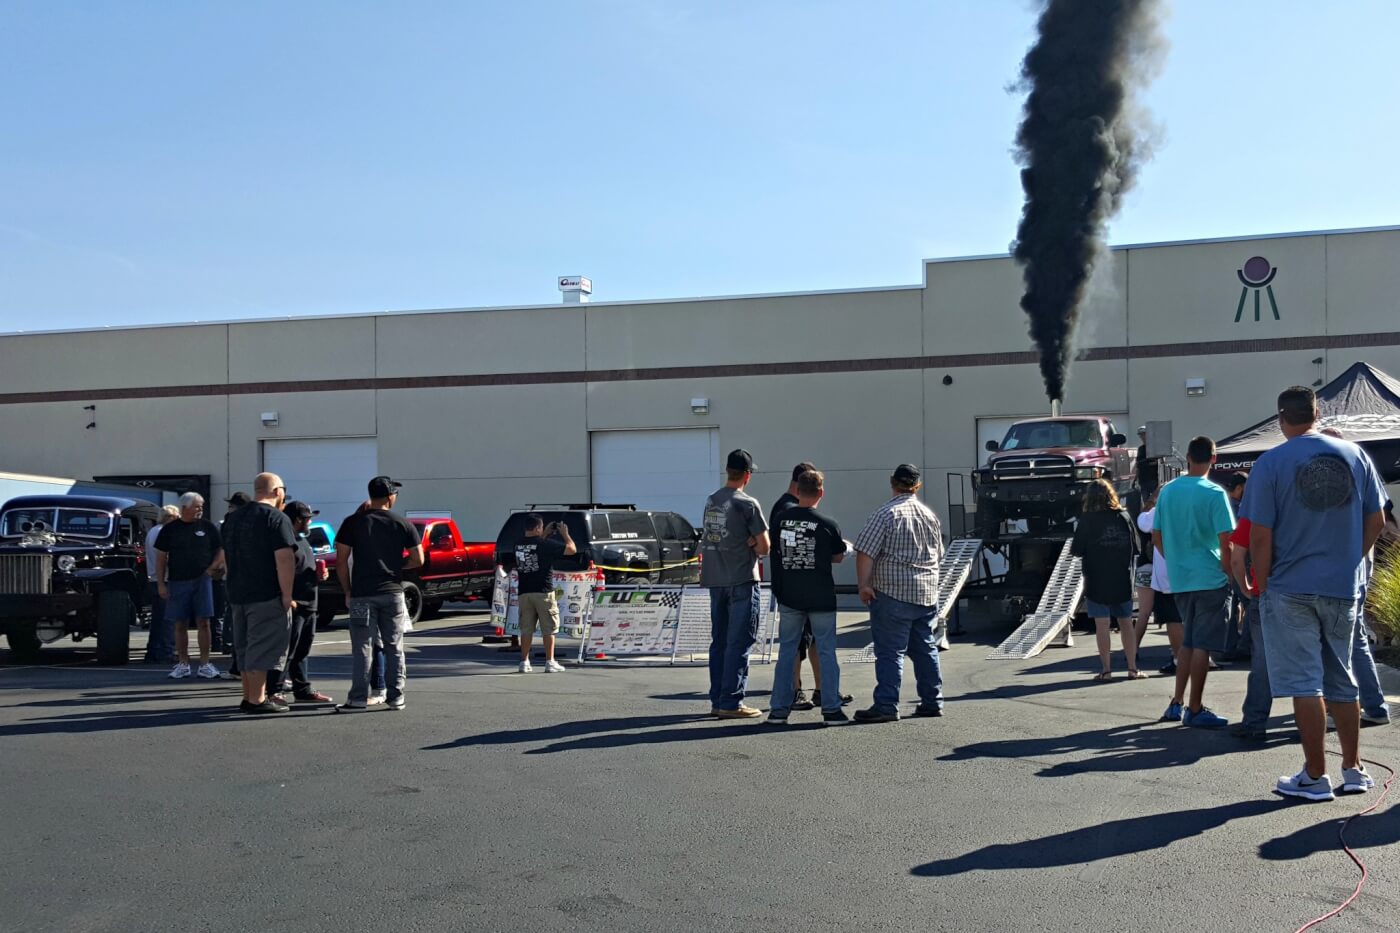 In the parking lot of Edge headquarters, the Northwest Dyno Circuit portable Superflow chassis dyno helped carry the load of over 90 entries in the day’s dyno competition. With the help of both of Edge’s in-house dynos, wait times were short and the action kept rolling throughout the day.